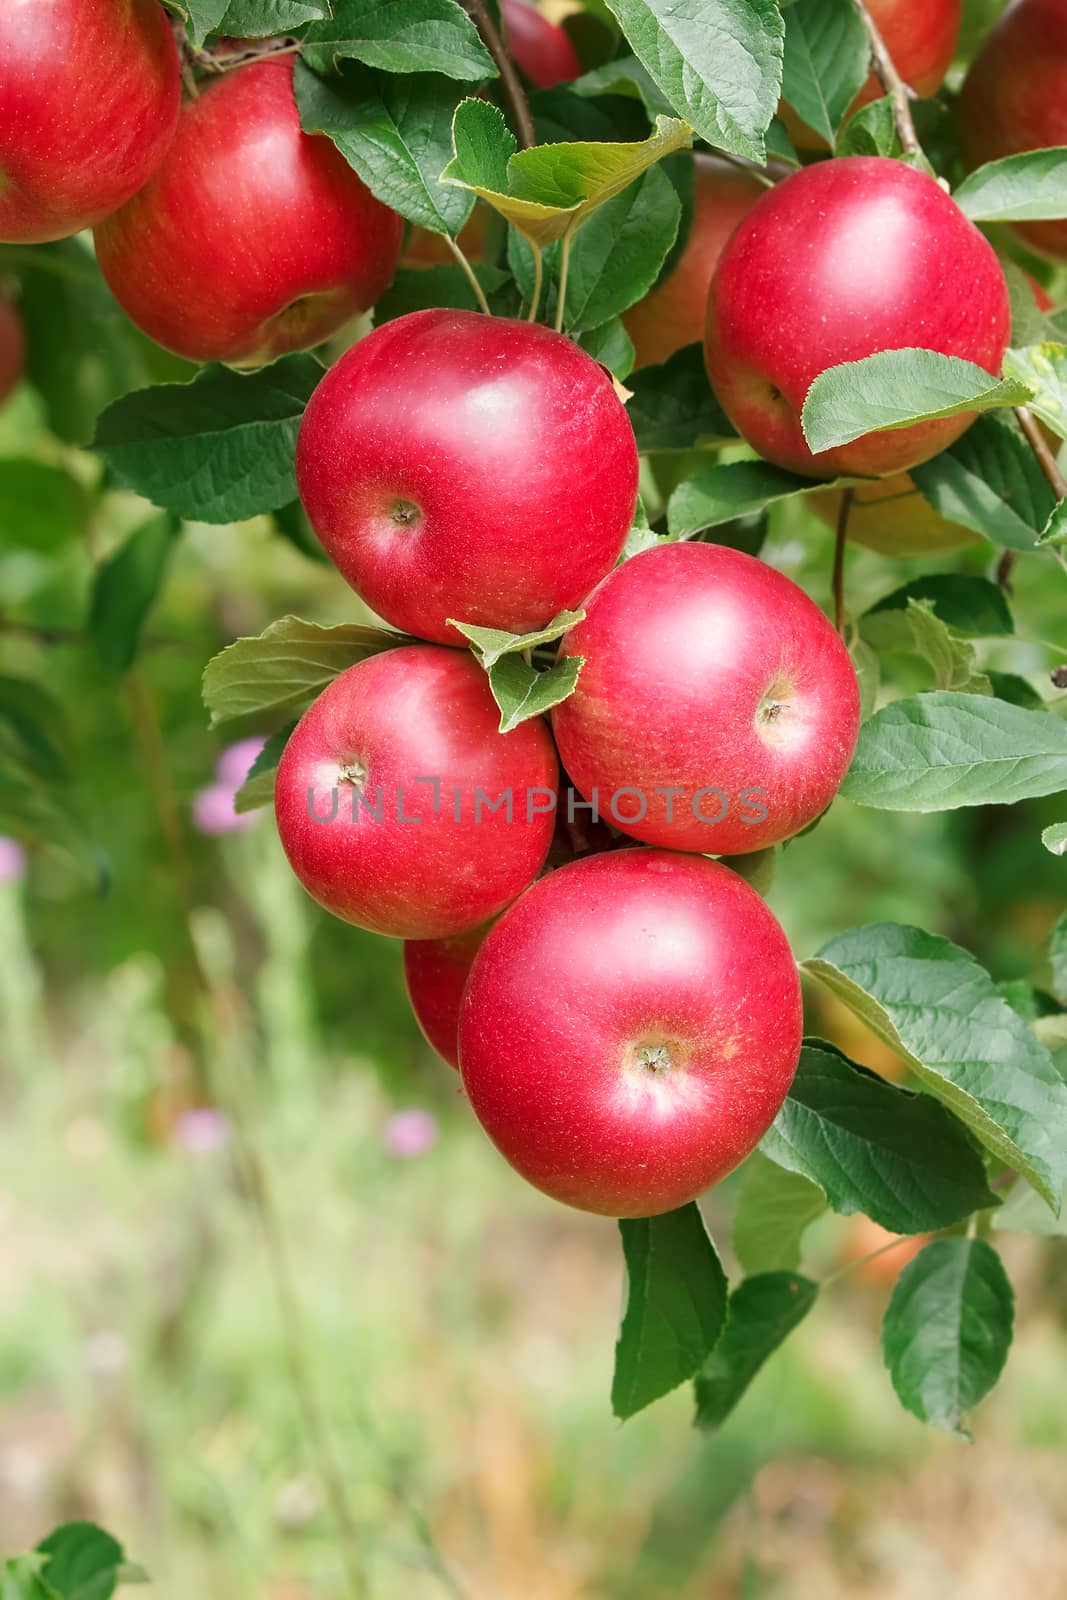 Red apples on branch by Slast20